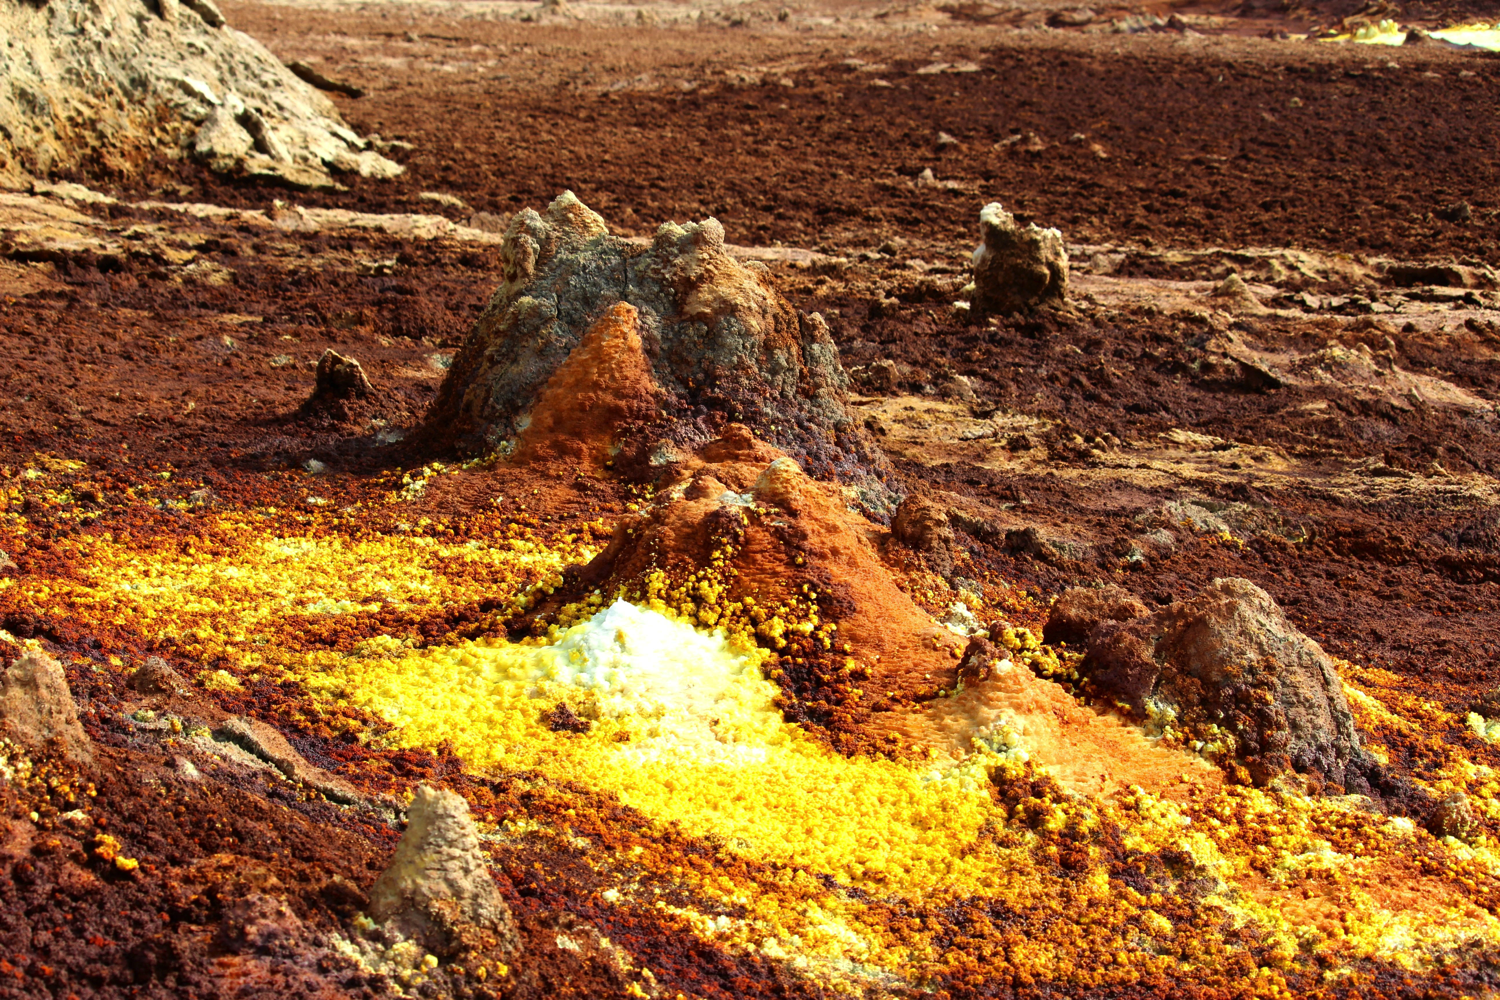 This Toxic Hot Spring Looks Like An Acid-Fuelled Nightmare